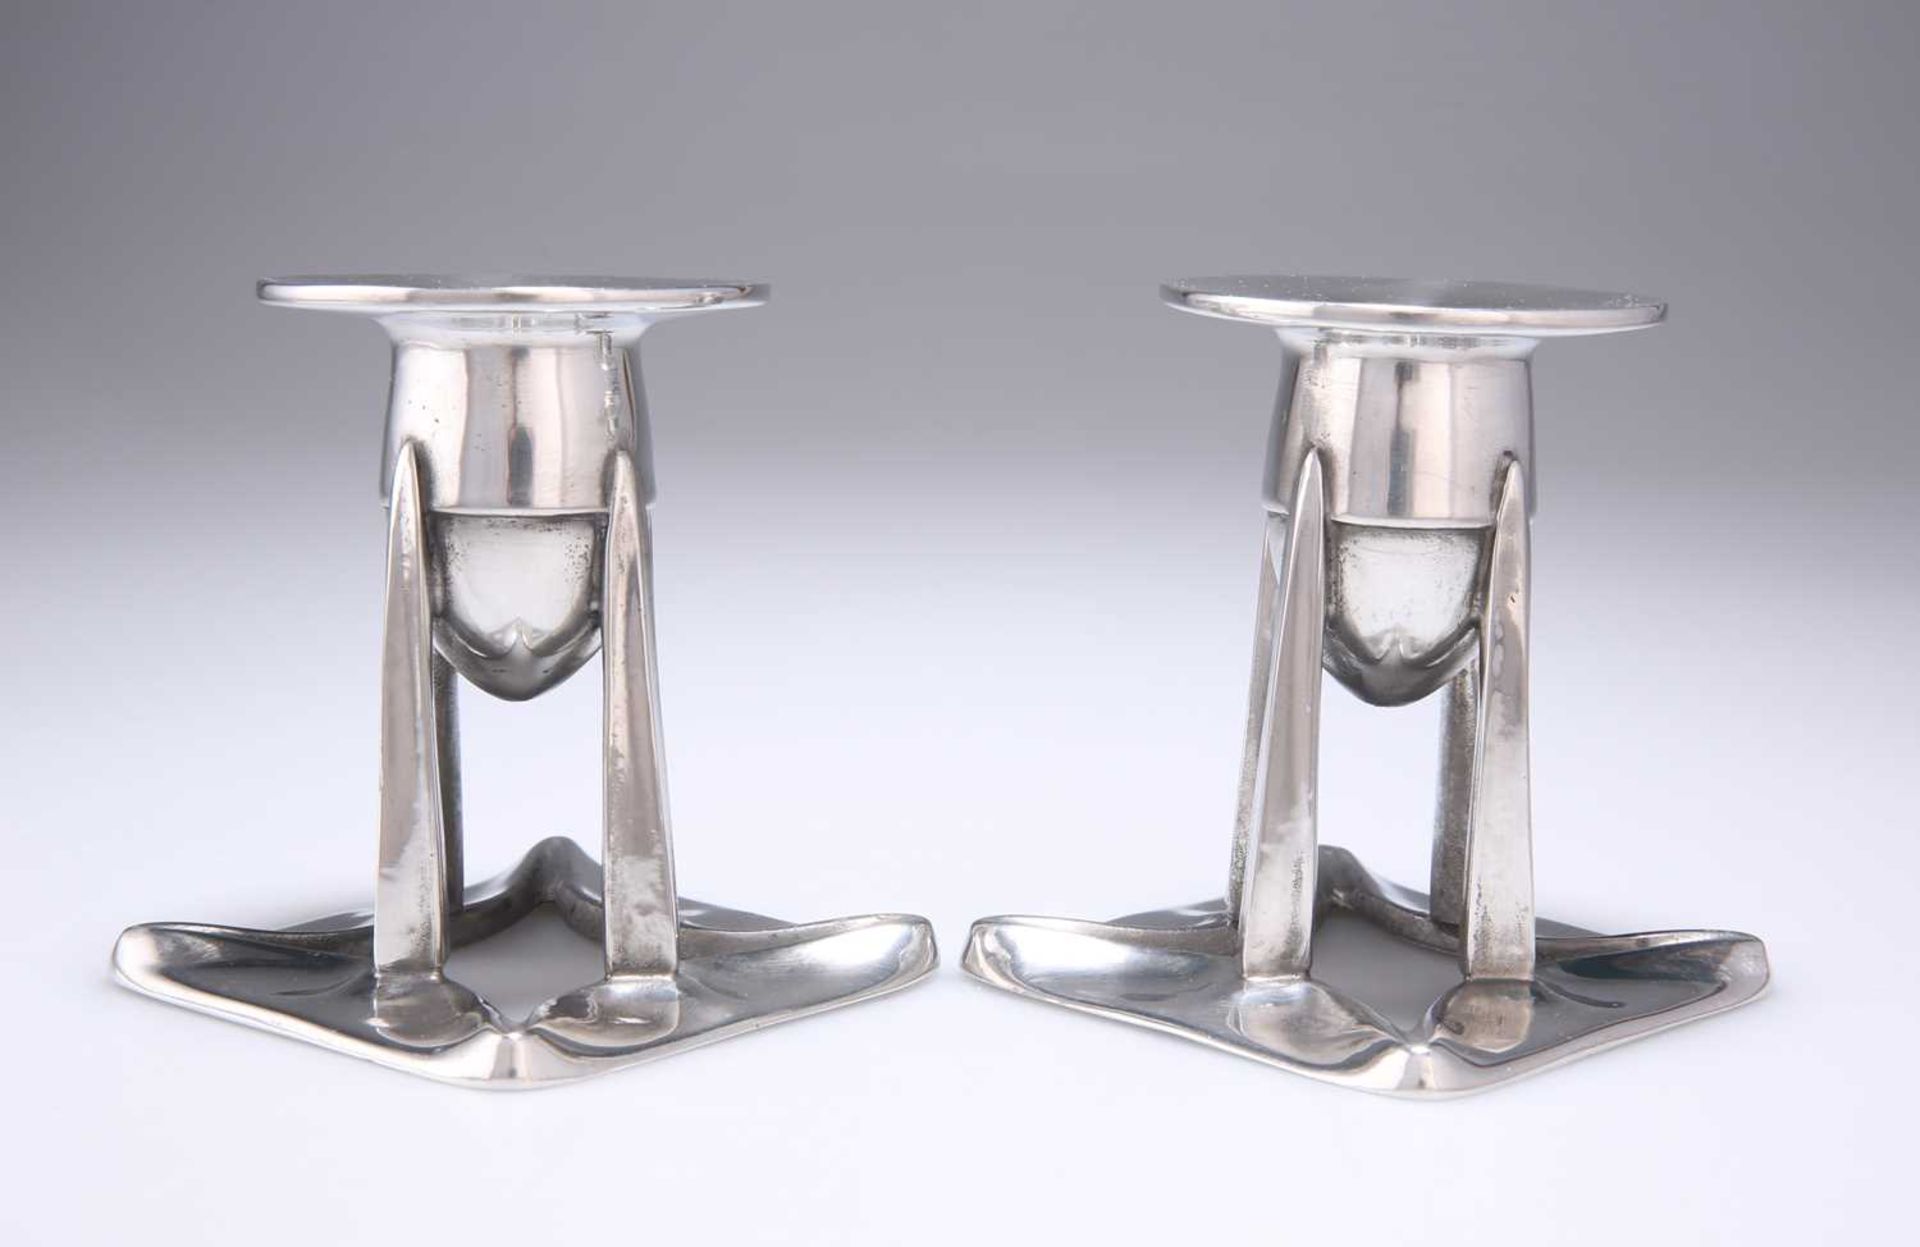 ARCHIBALD KNOX (1864-1933) FOR LIBERTY & CO, A PAIR OF TUDRIC PEWTER CANDLESTICKS